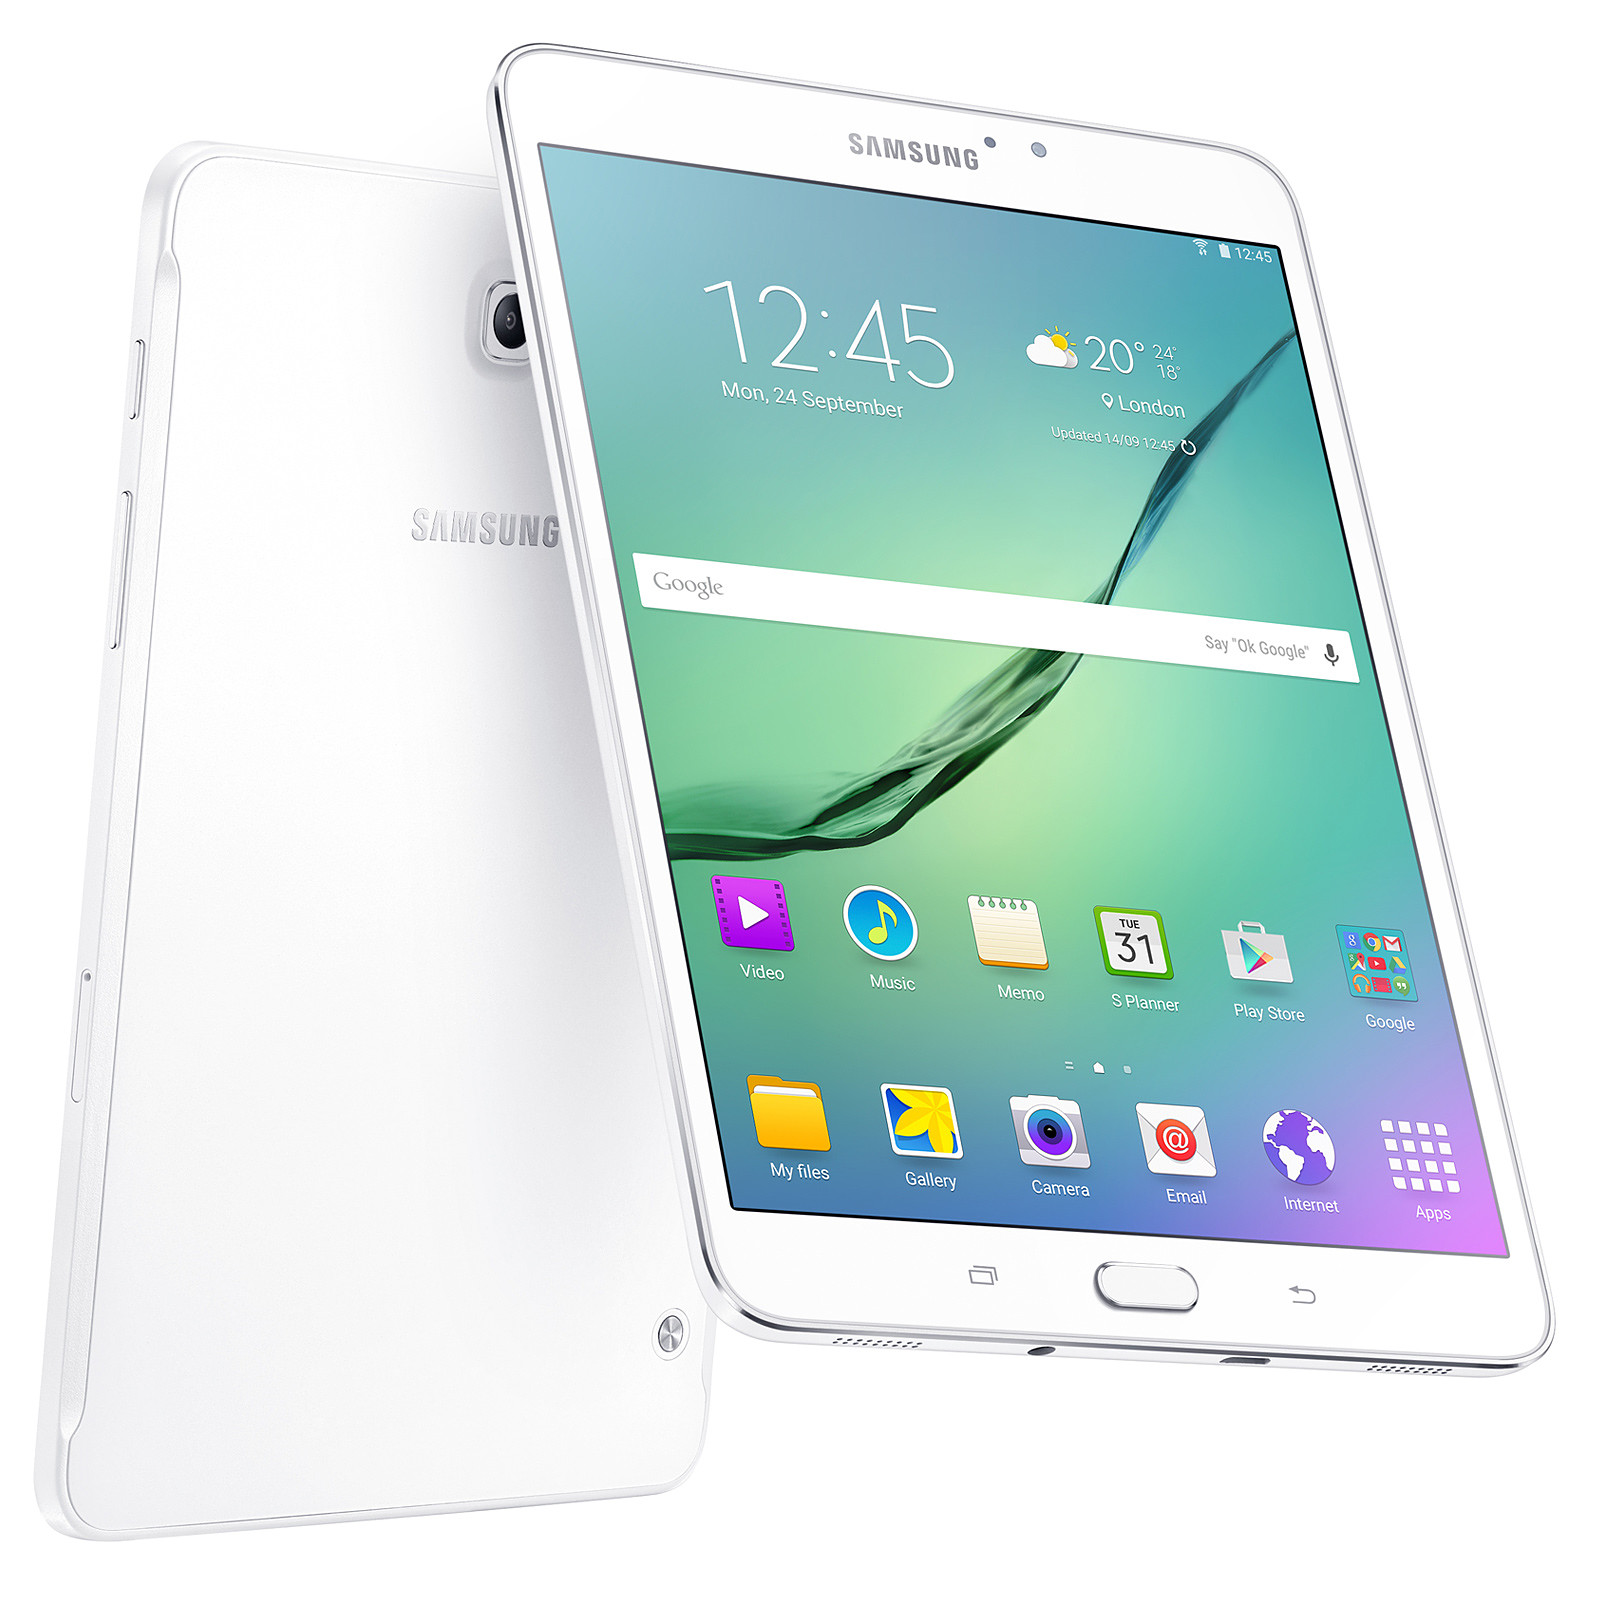 Samsung Galaxy Tab S2 8" Value Edition SM-T713 32 Go Blanc · Reconditionne - Tablette tactile Samsung